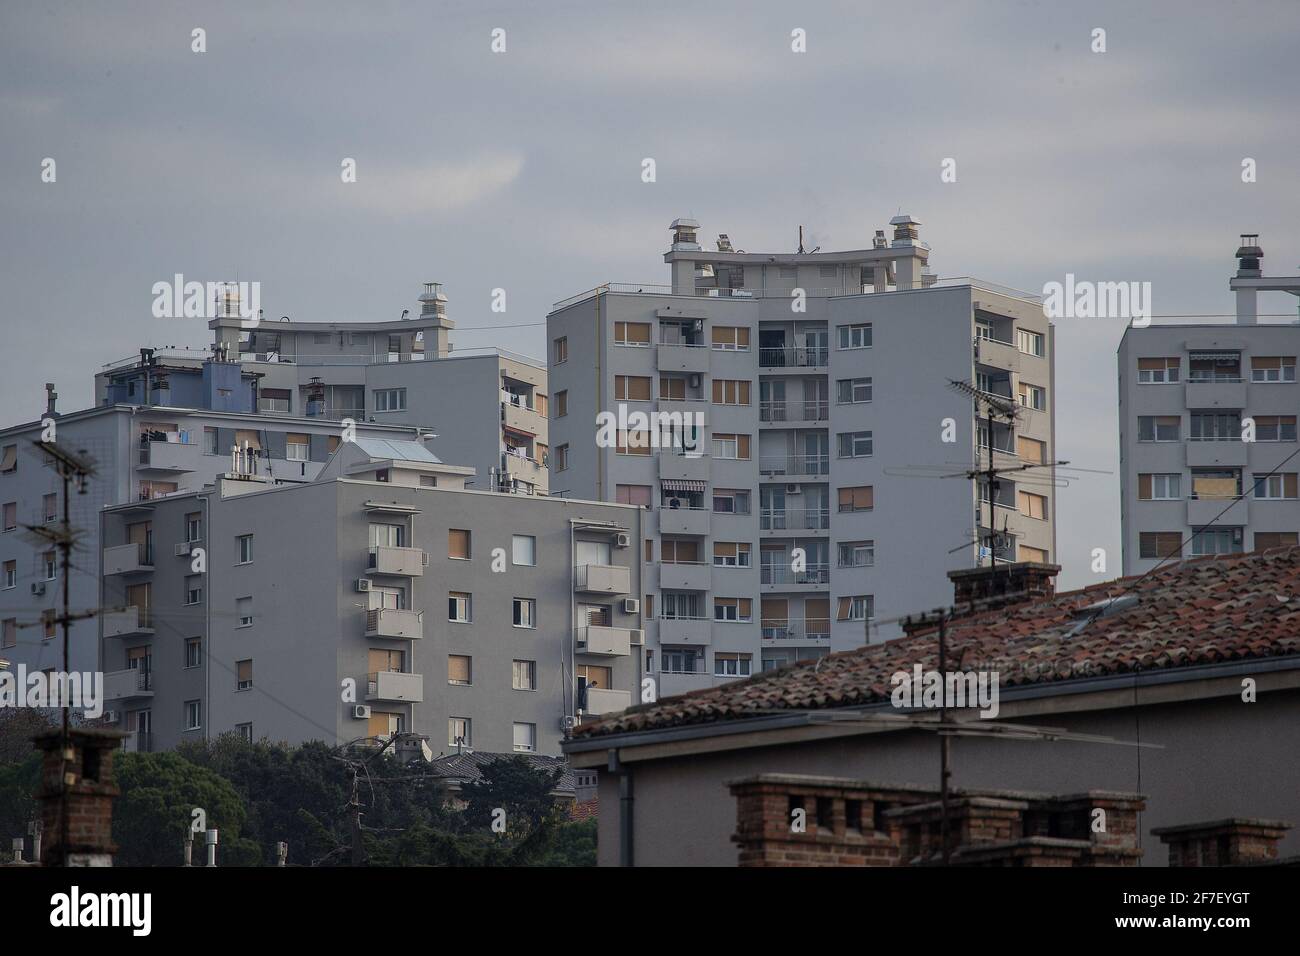 City blocks or condominiums packed together in a city of Rijeka, Croatia on a sunny autumn day. Socialistic cubical buildings. Stock Photo